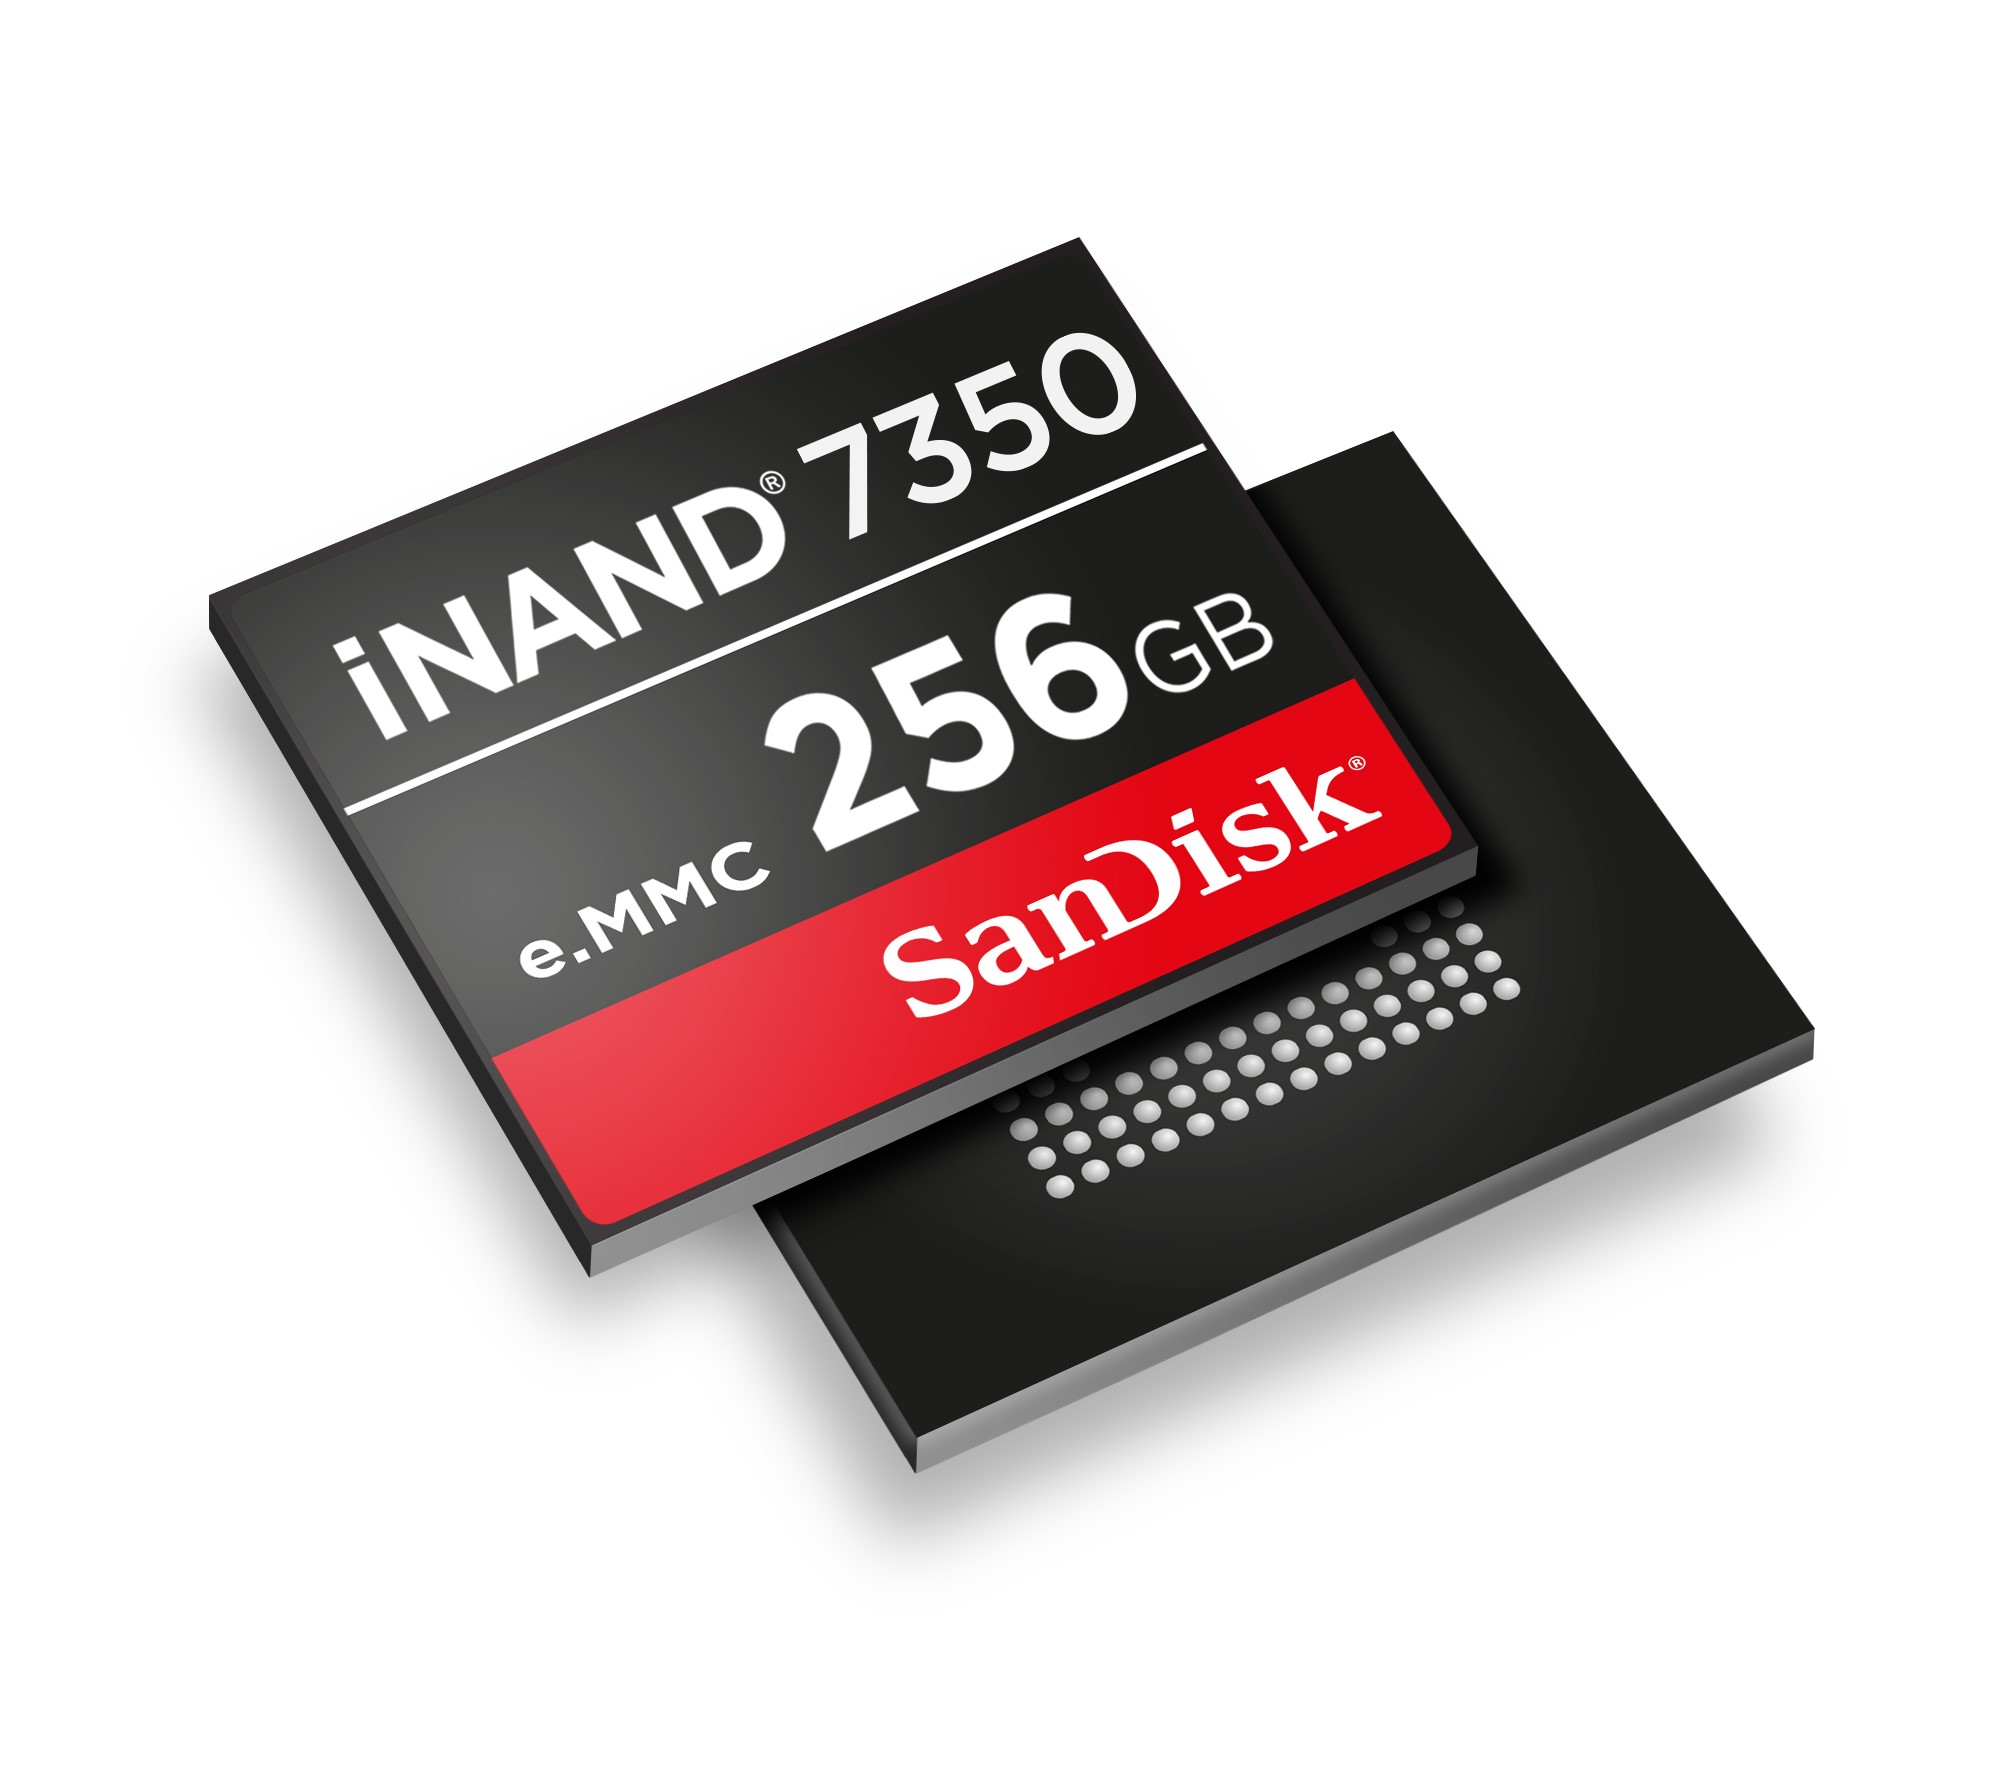 iNAND 7350 EFD 256GB